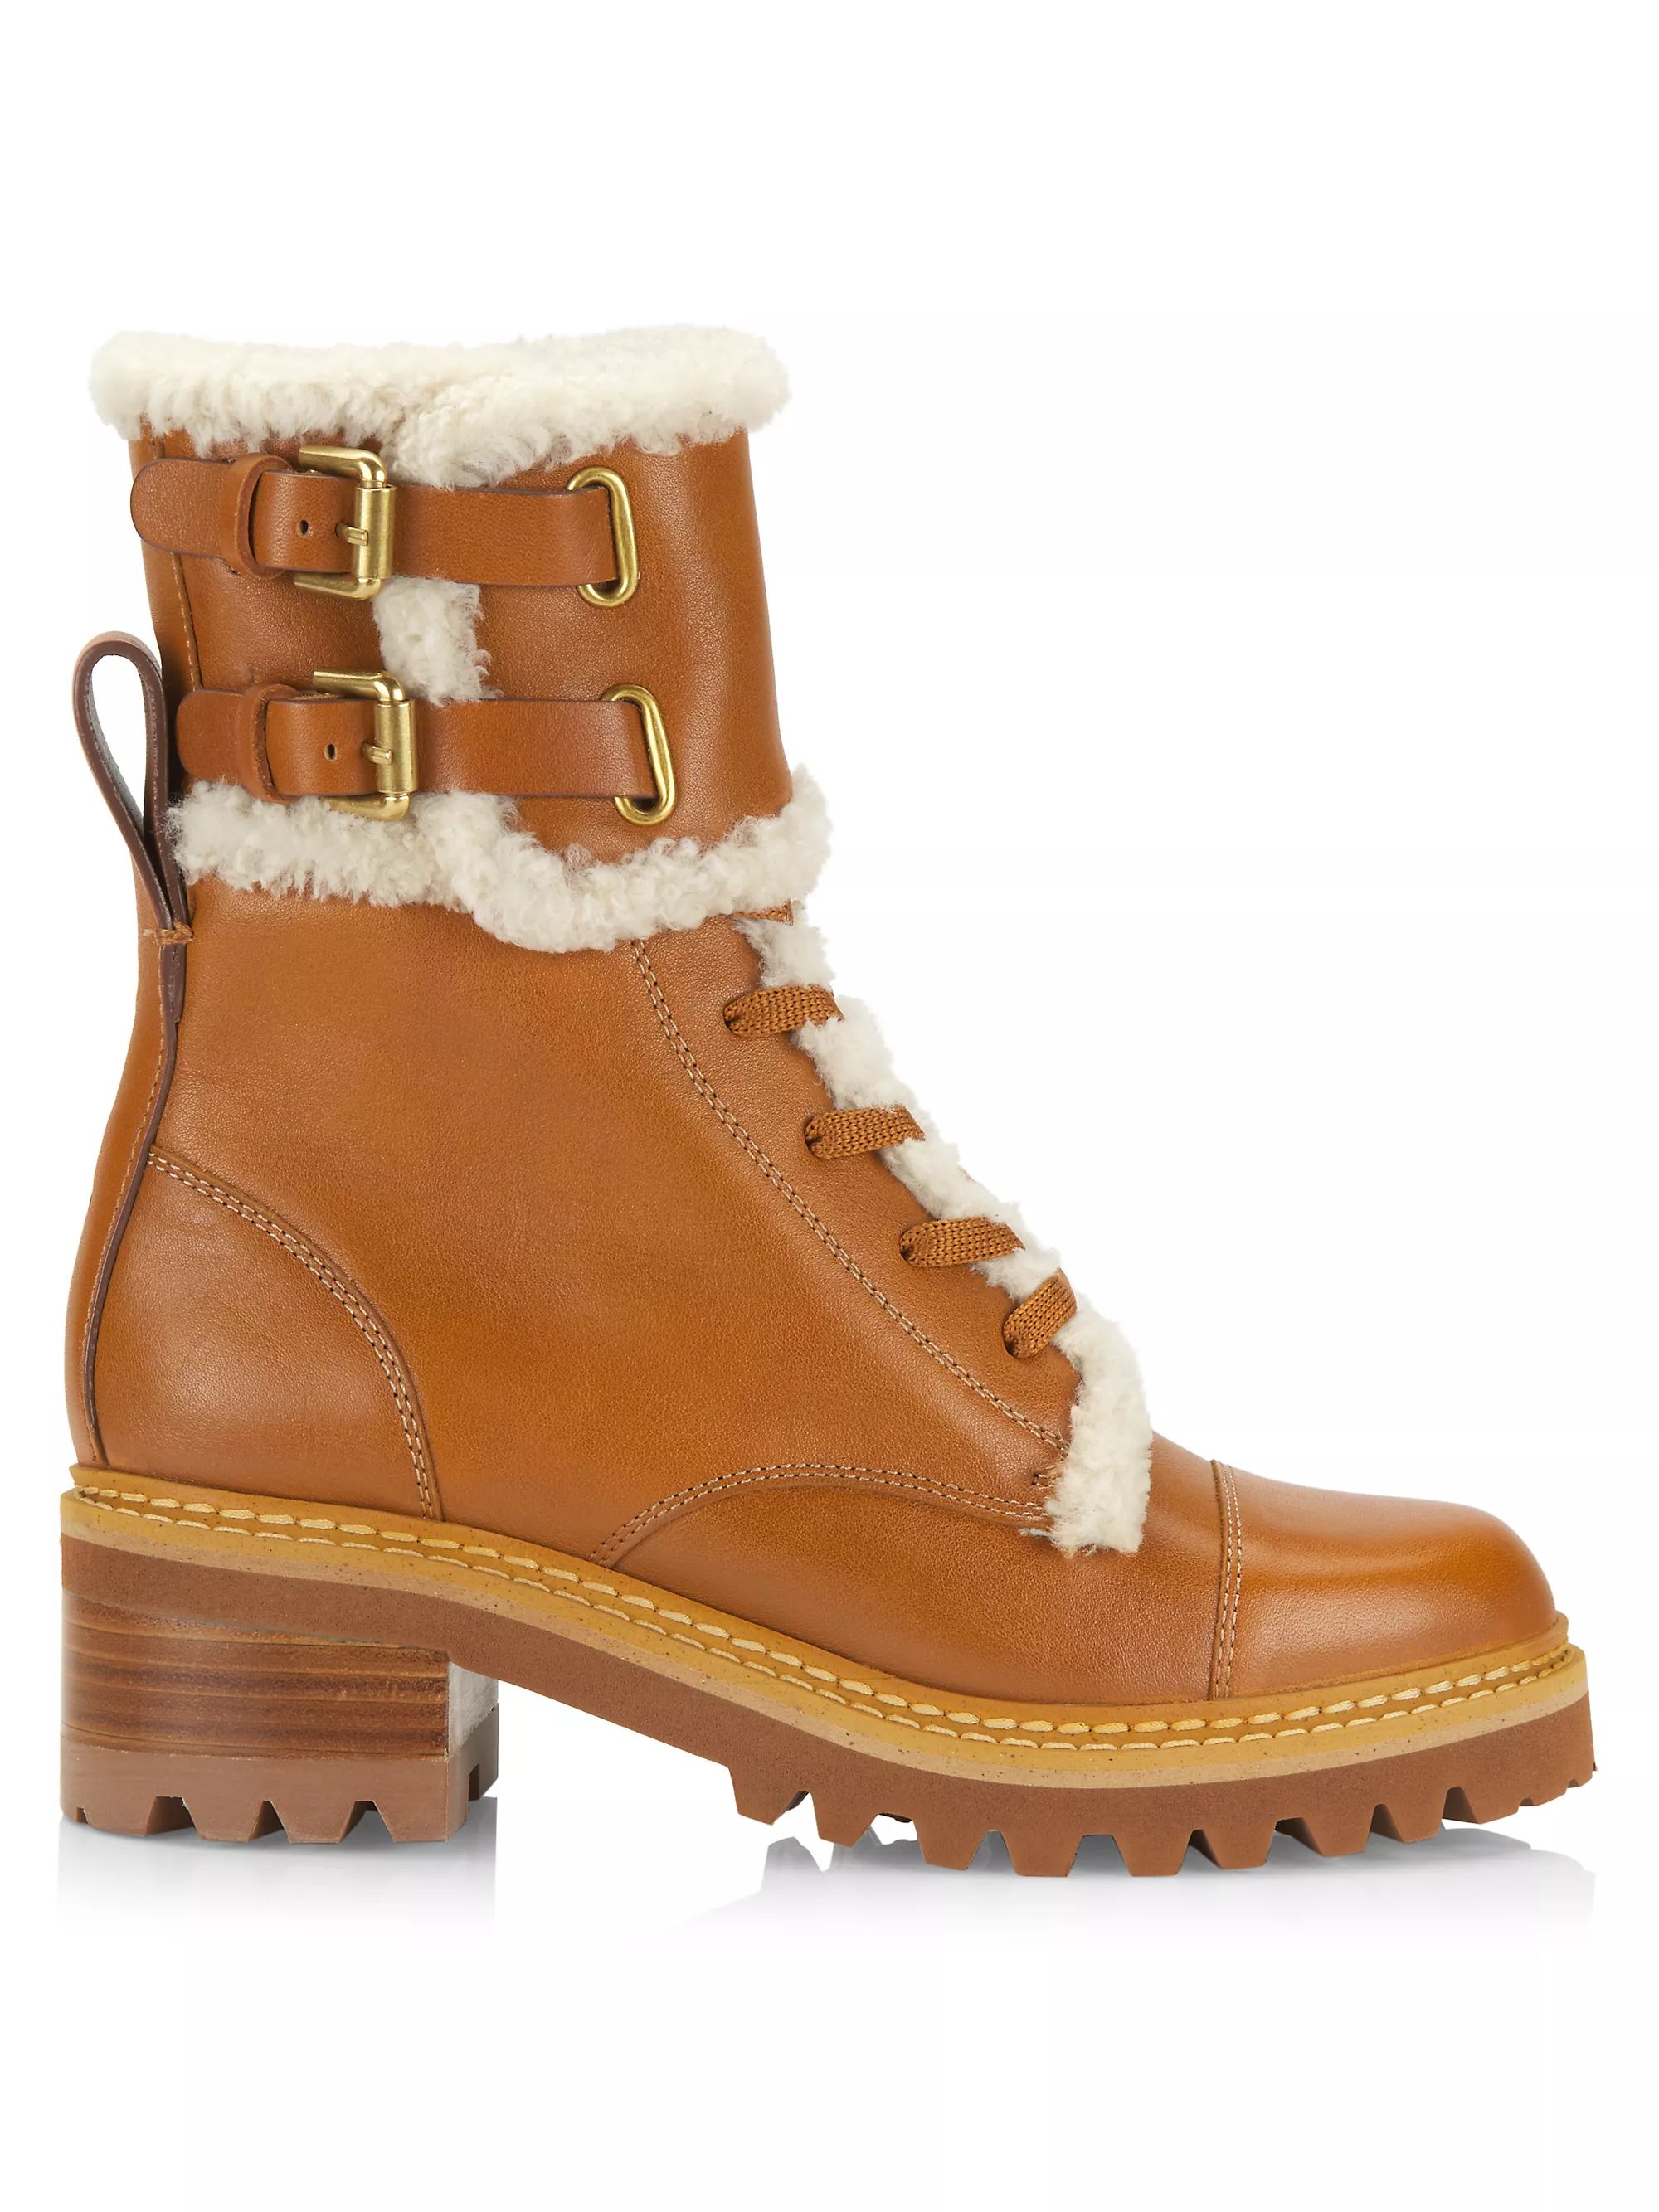 Mallory Shearling-Trimmed Leather Lace-Up Boots | Saks Fifth Avenue